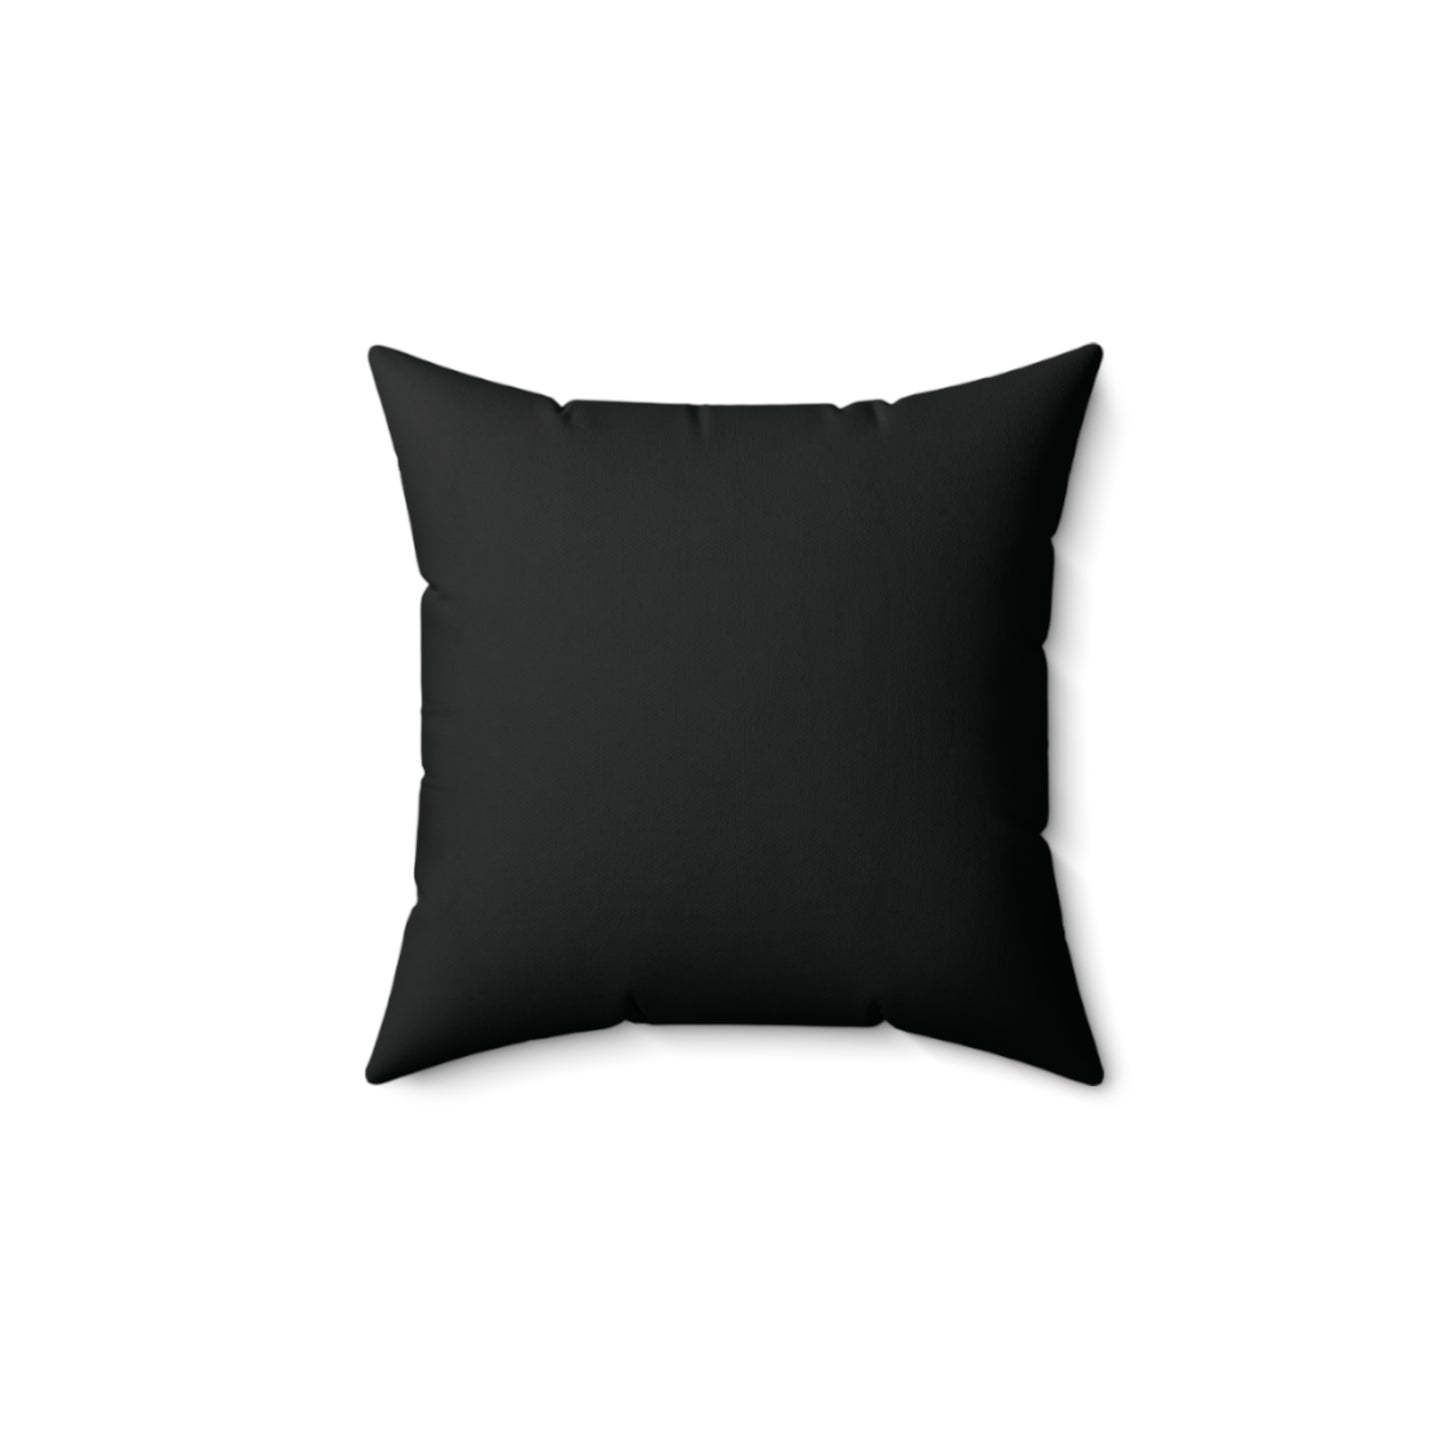 Special Ed Teacher Square Pillow - "Teaching SPED Because Regular Teaching Was Too Easy"